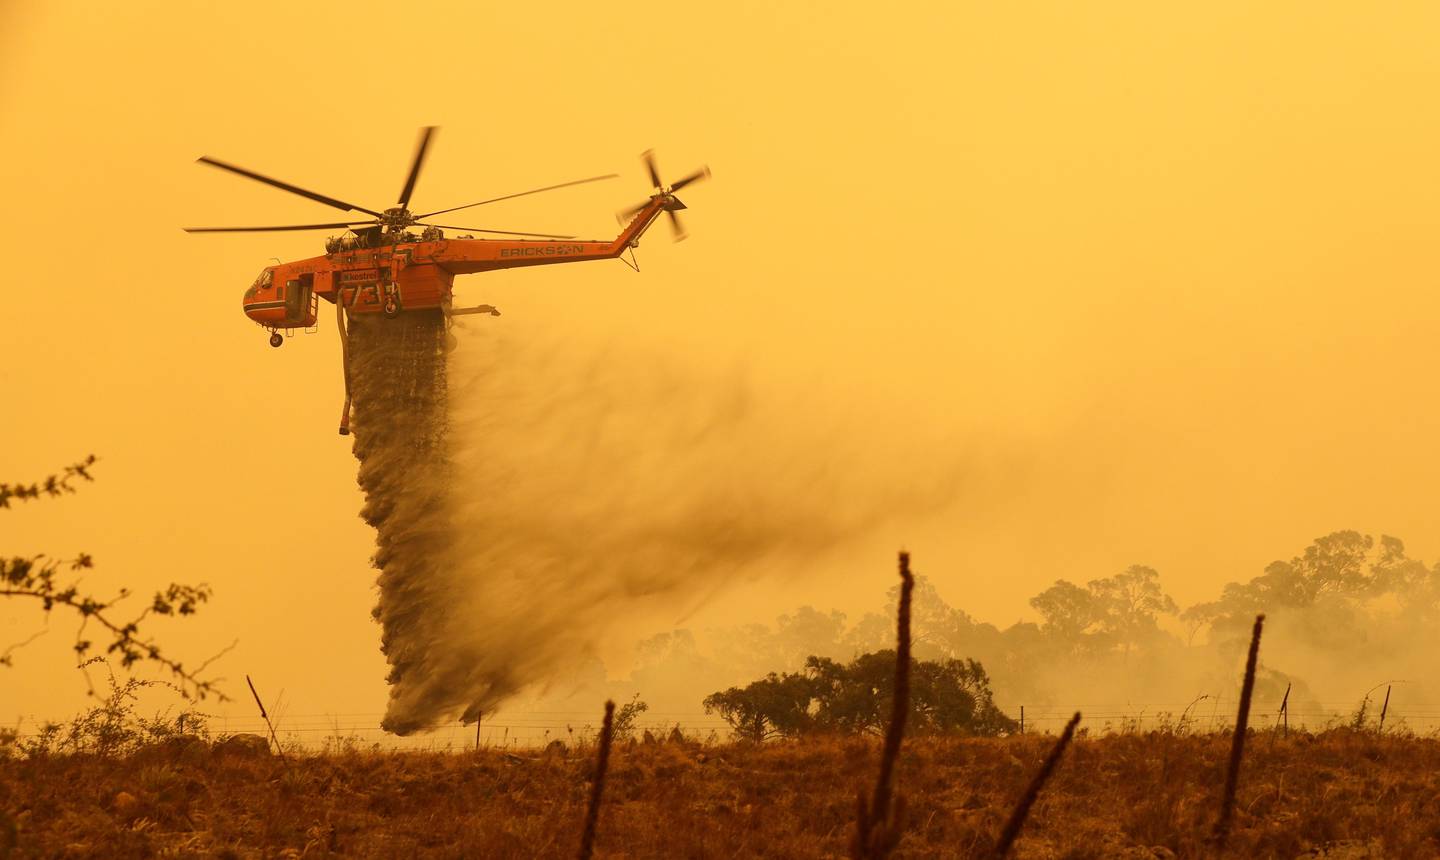 A helicopter drops water on a fire near Bumbalong, south of the Australian capital, Canberra, Saturday, Feb. 1, 2020. The threat is posed by a blaze on Canberra's southern fringe that has razed more than 21,500 hectares (53,000 acres) since it was sparked by heat from a military helicopter landing light on Monday, the Emergency Services Agency said. (AP Photo/Rick Rycroft)